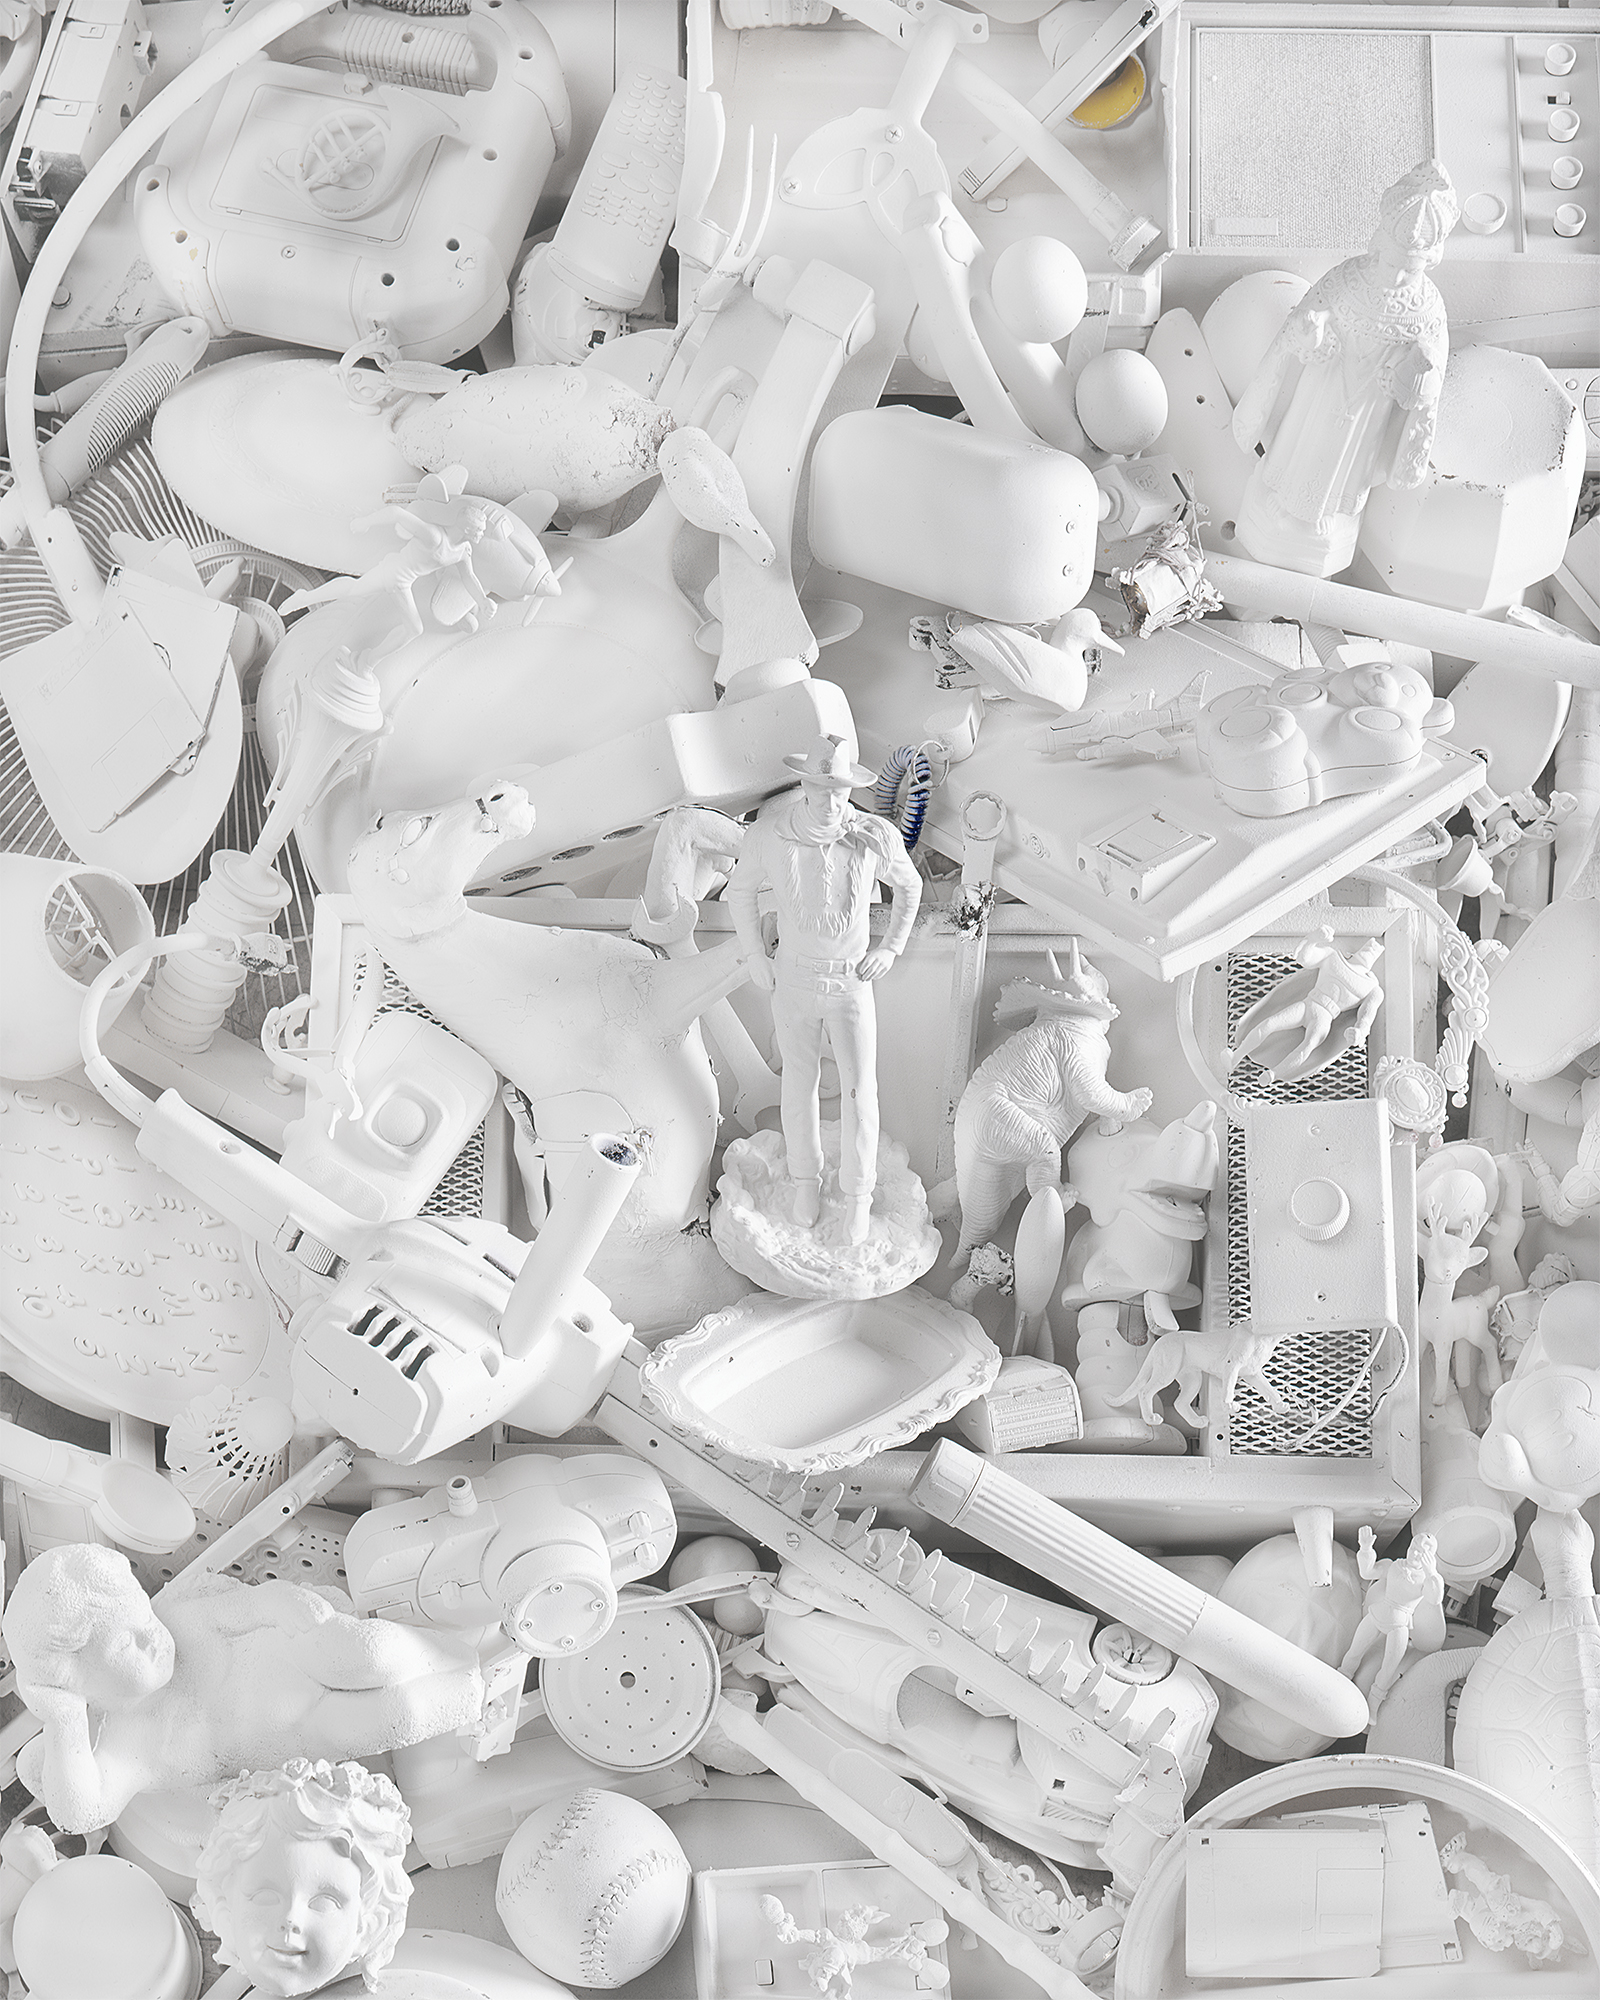 A tight shot of a pile of toys like dinosaurs and figures and dolls and baseballs all painted the same shade of white